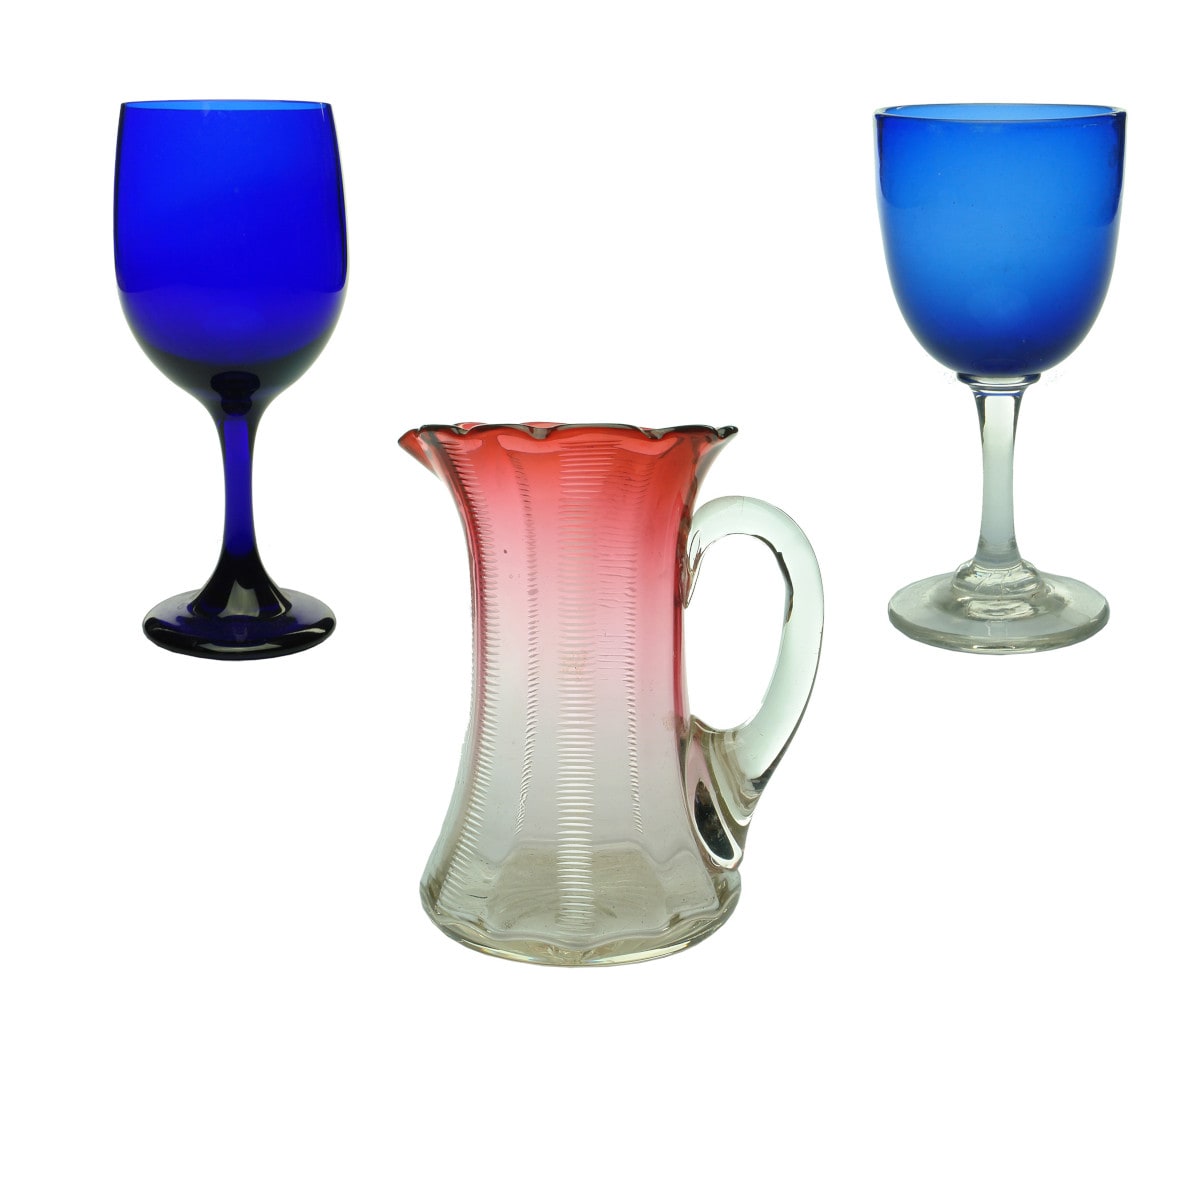 3 items. Two Glasses & a Jug: Blue Wine Glass and Victorian Bristol Blue Wine Glass with clear stem. Handled Ruby Jug.